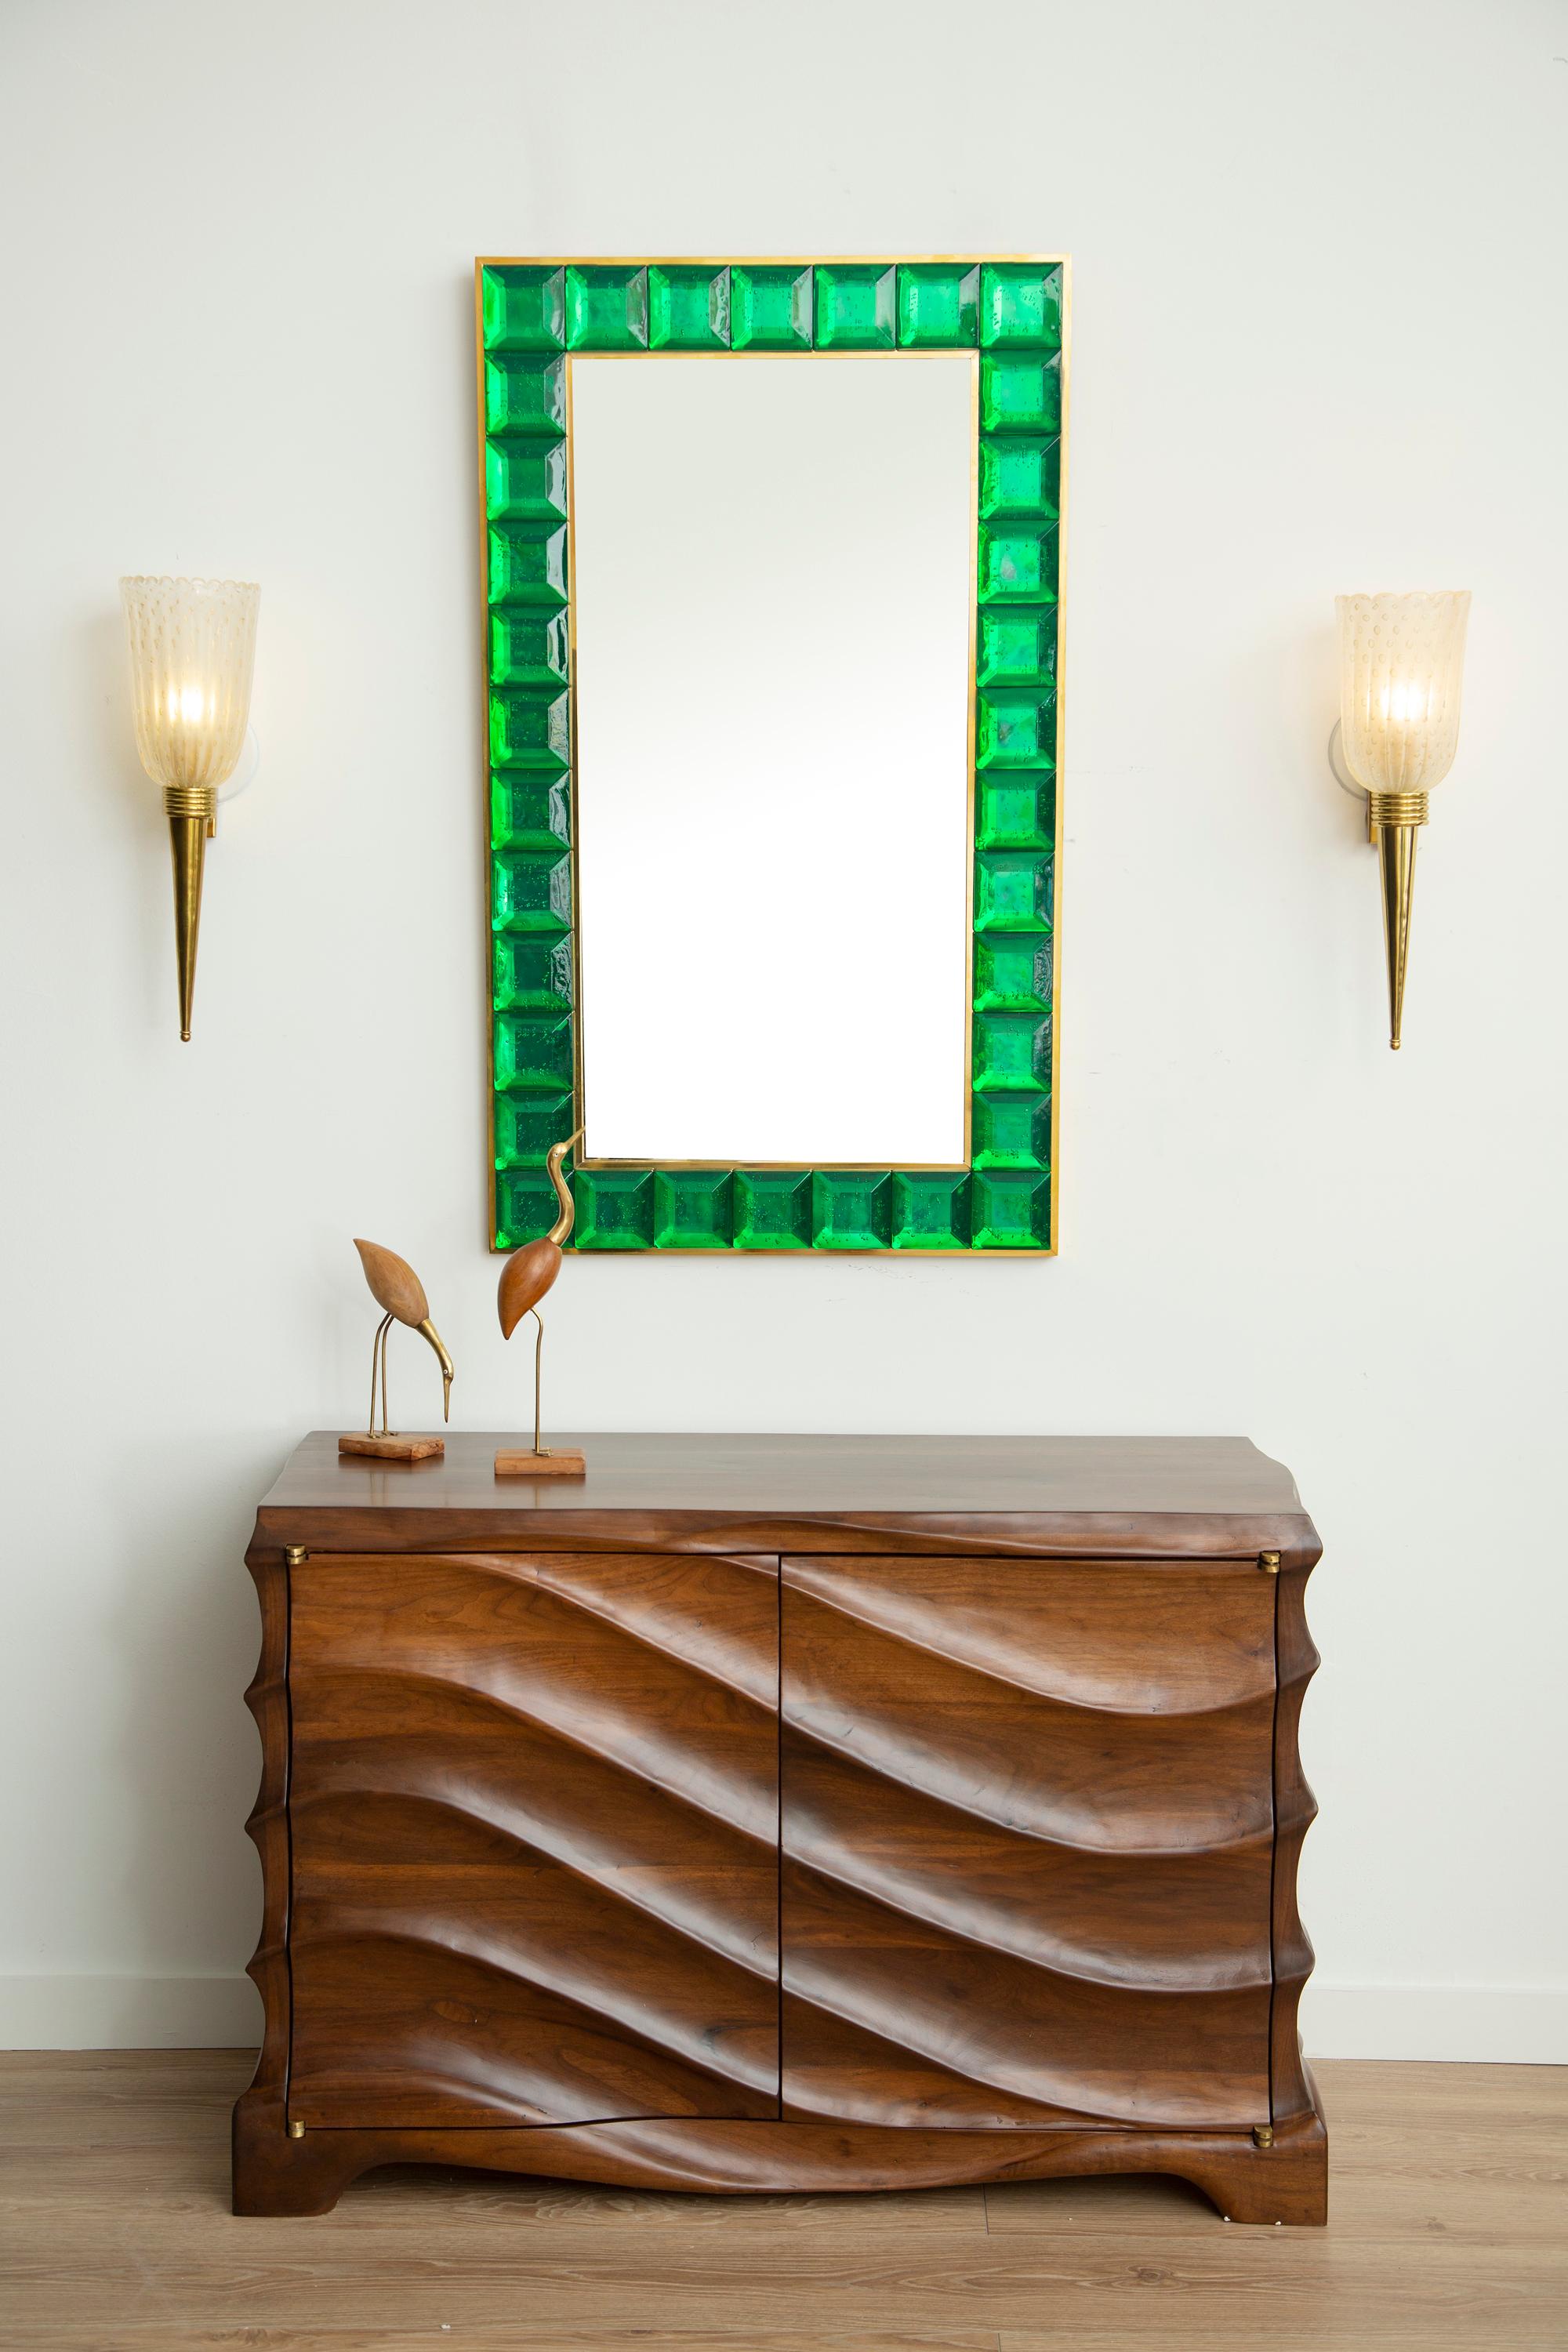 Contemporary emerald green square diamond cut Murano glass mirror.
Vivid and intense emerald green glass block with naturally occurring air inclusions throughout 
 Highly polished faceted pattern
 Brass gallery
 Luxury handcrafted by a team of